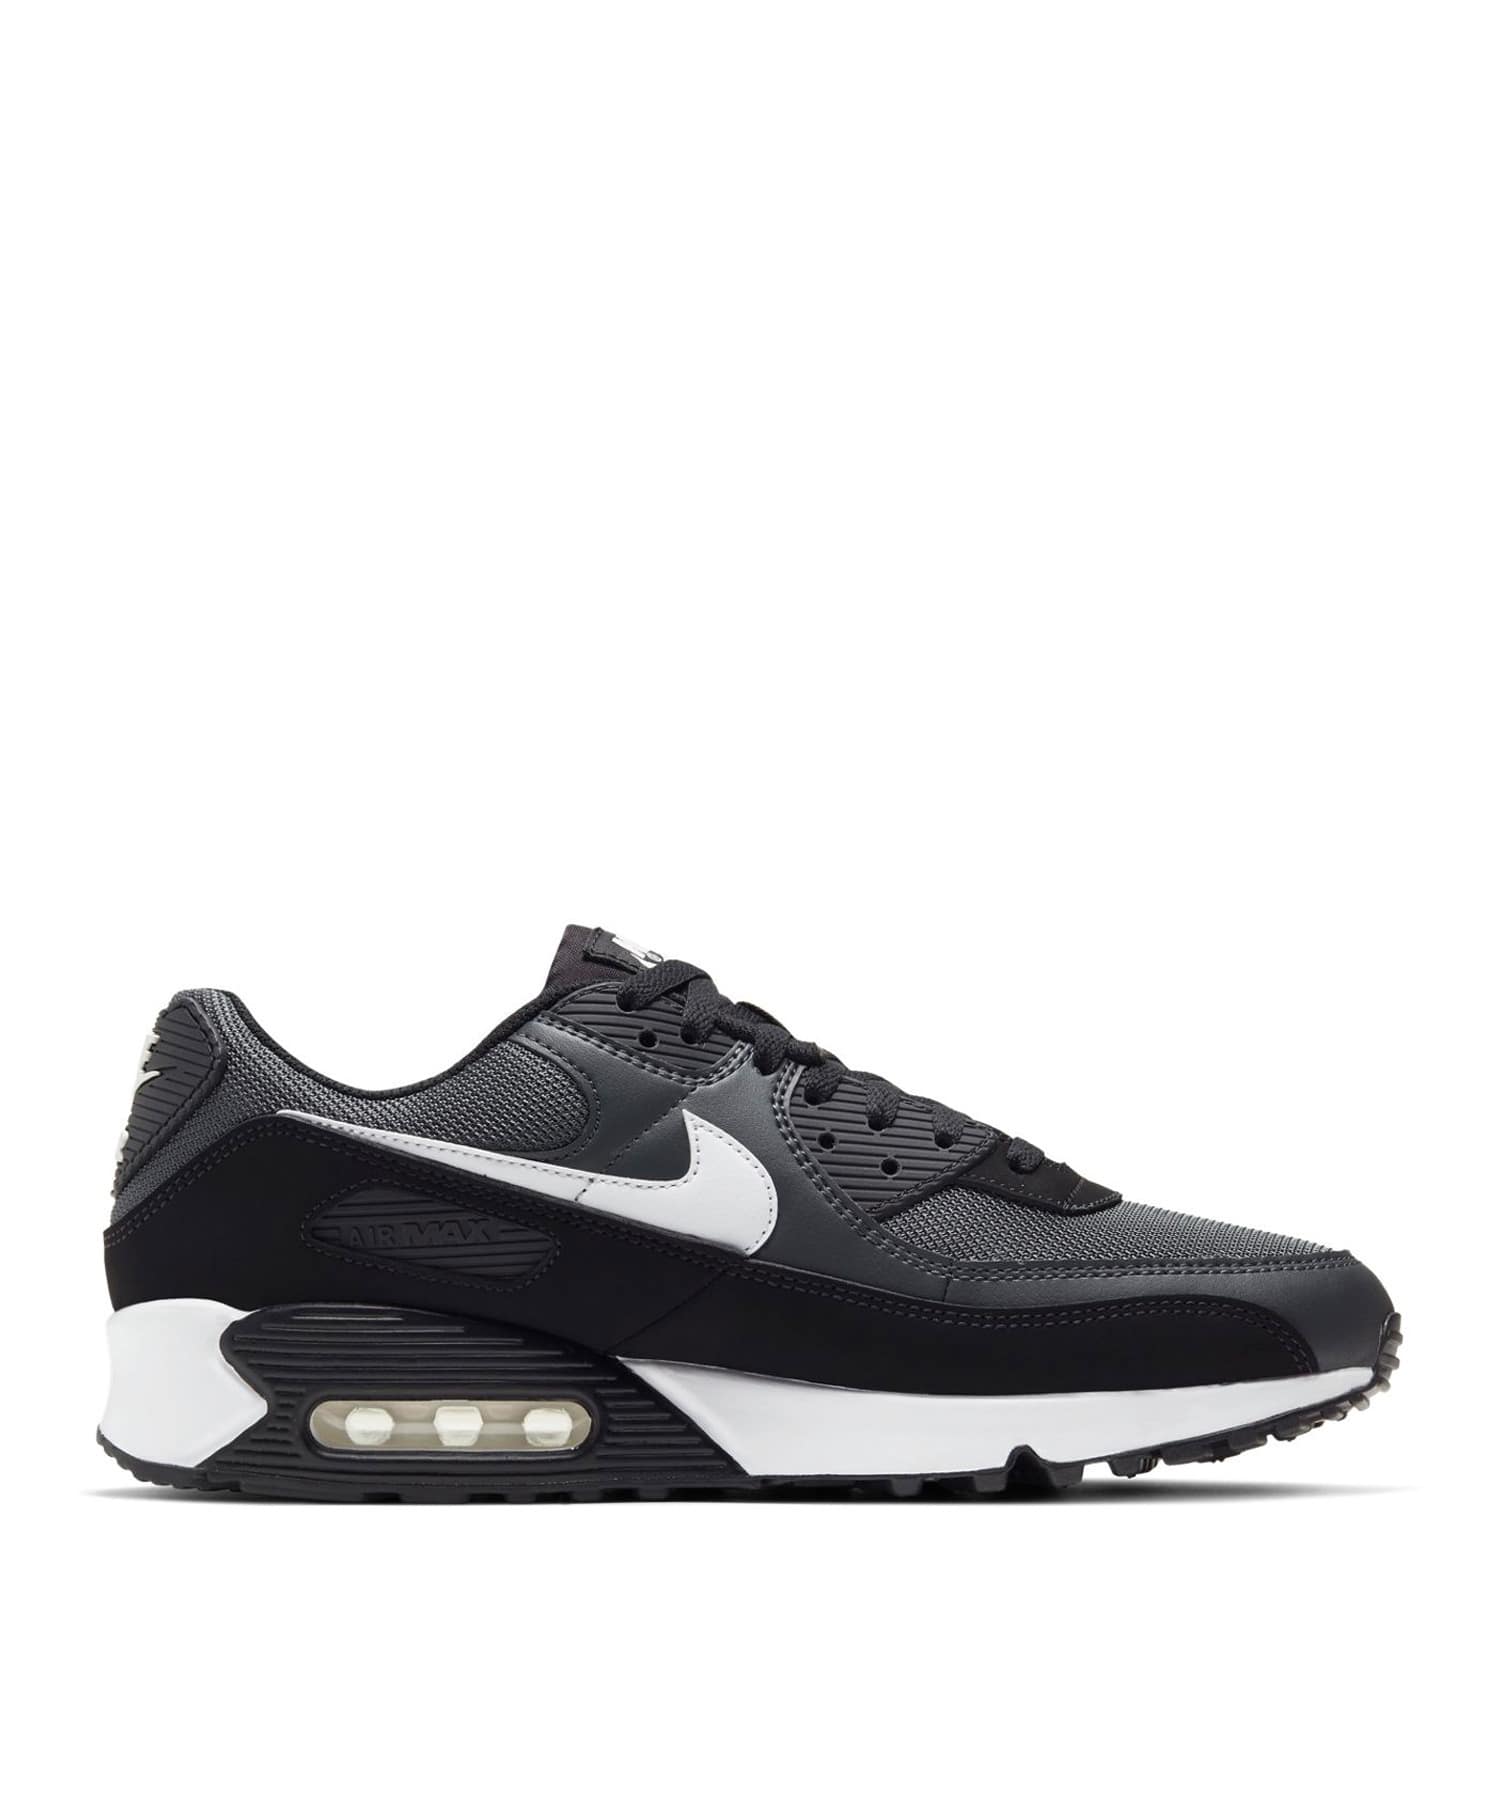 NIKE / AIR MAX 90｜ESTNATION ONLINE STORE｜エストネーション 公式通販